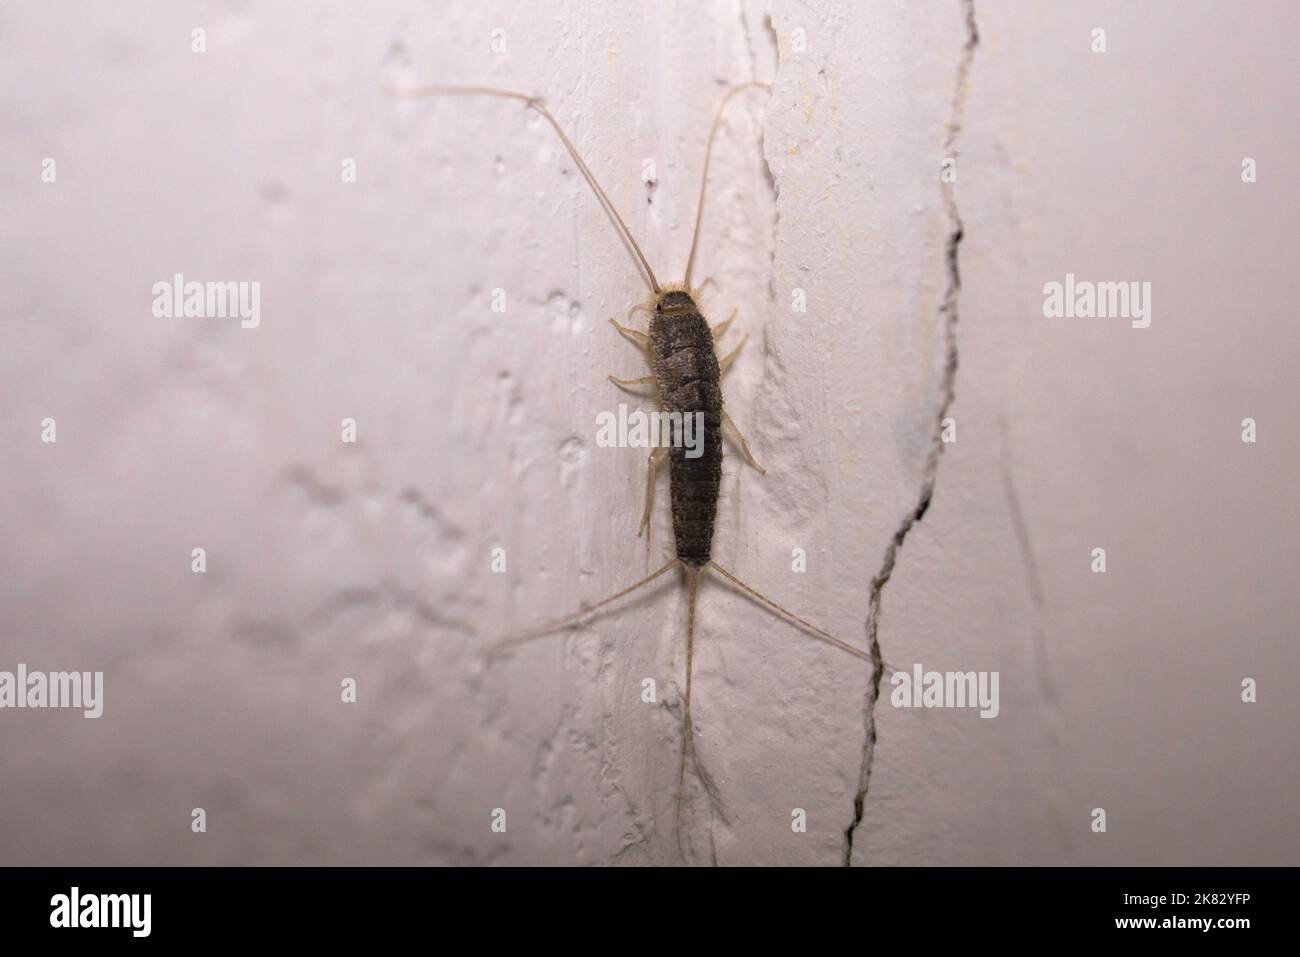 Closeup of a Silverfish insect at home. insect pest control. Stock Photo